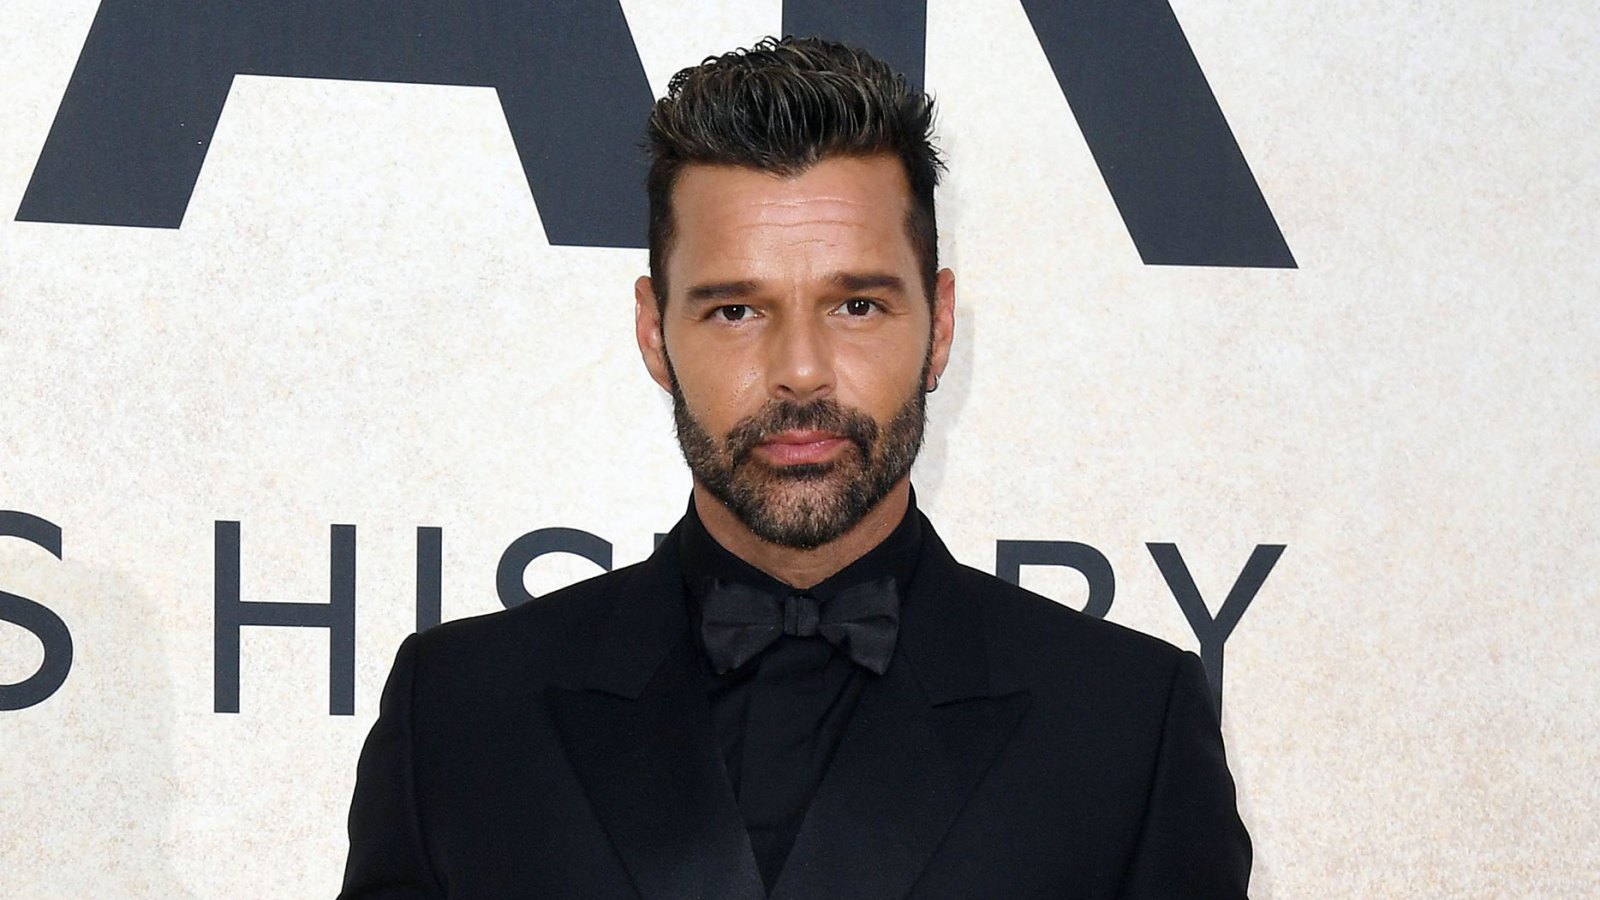 Ricky Martin’s Son Matteo 13 Joins Him On Set For Music Video in Rare Photo